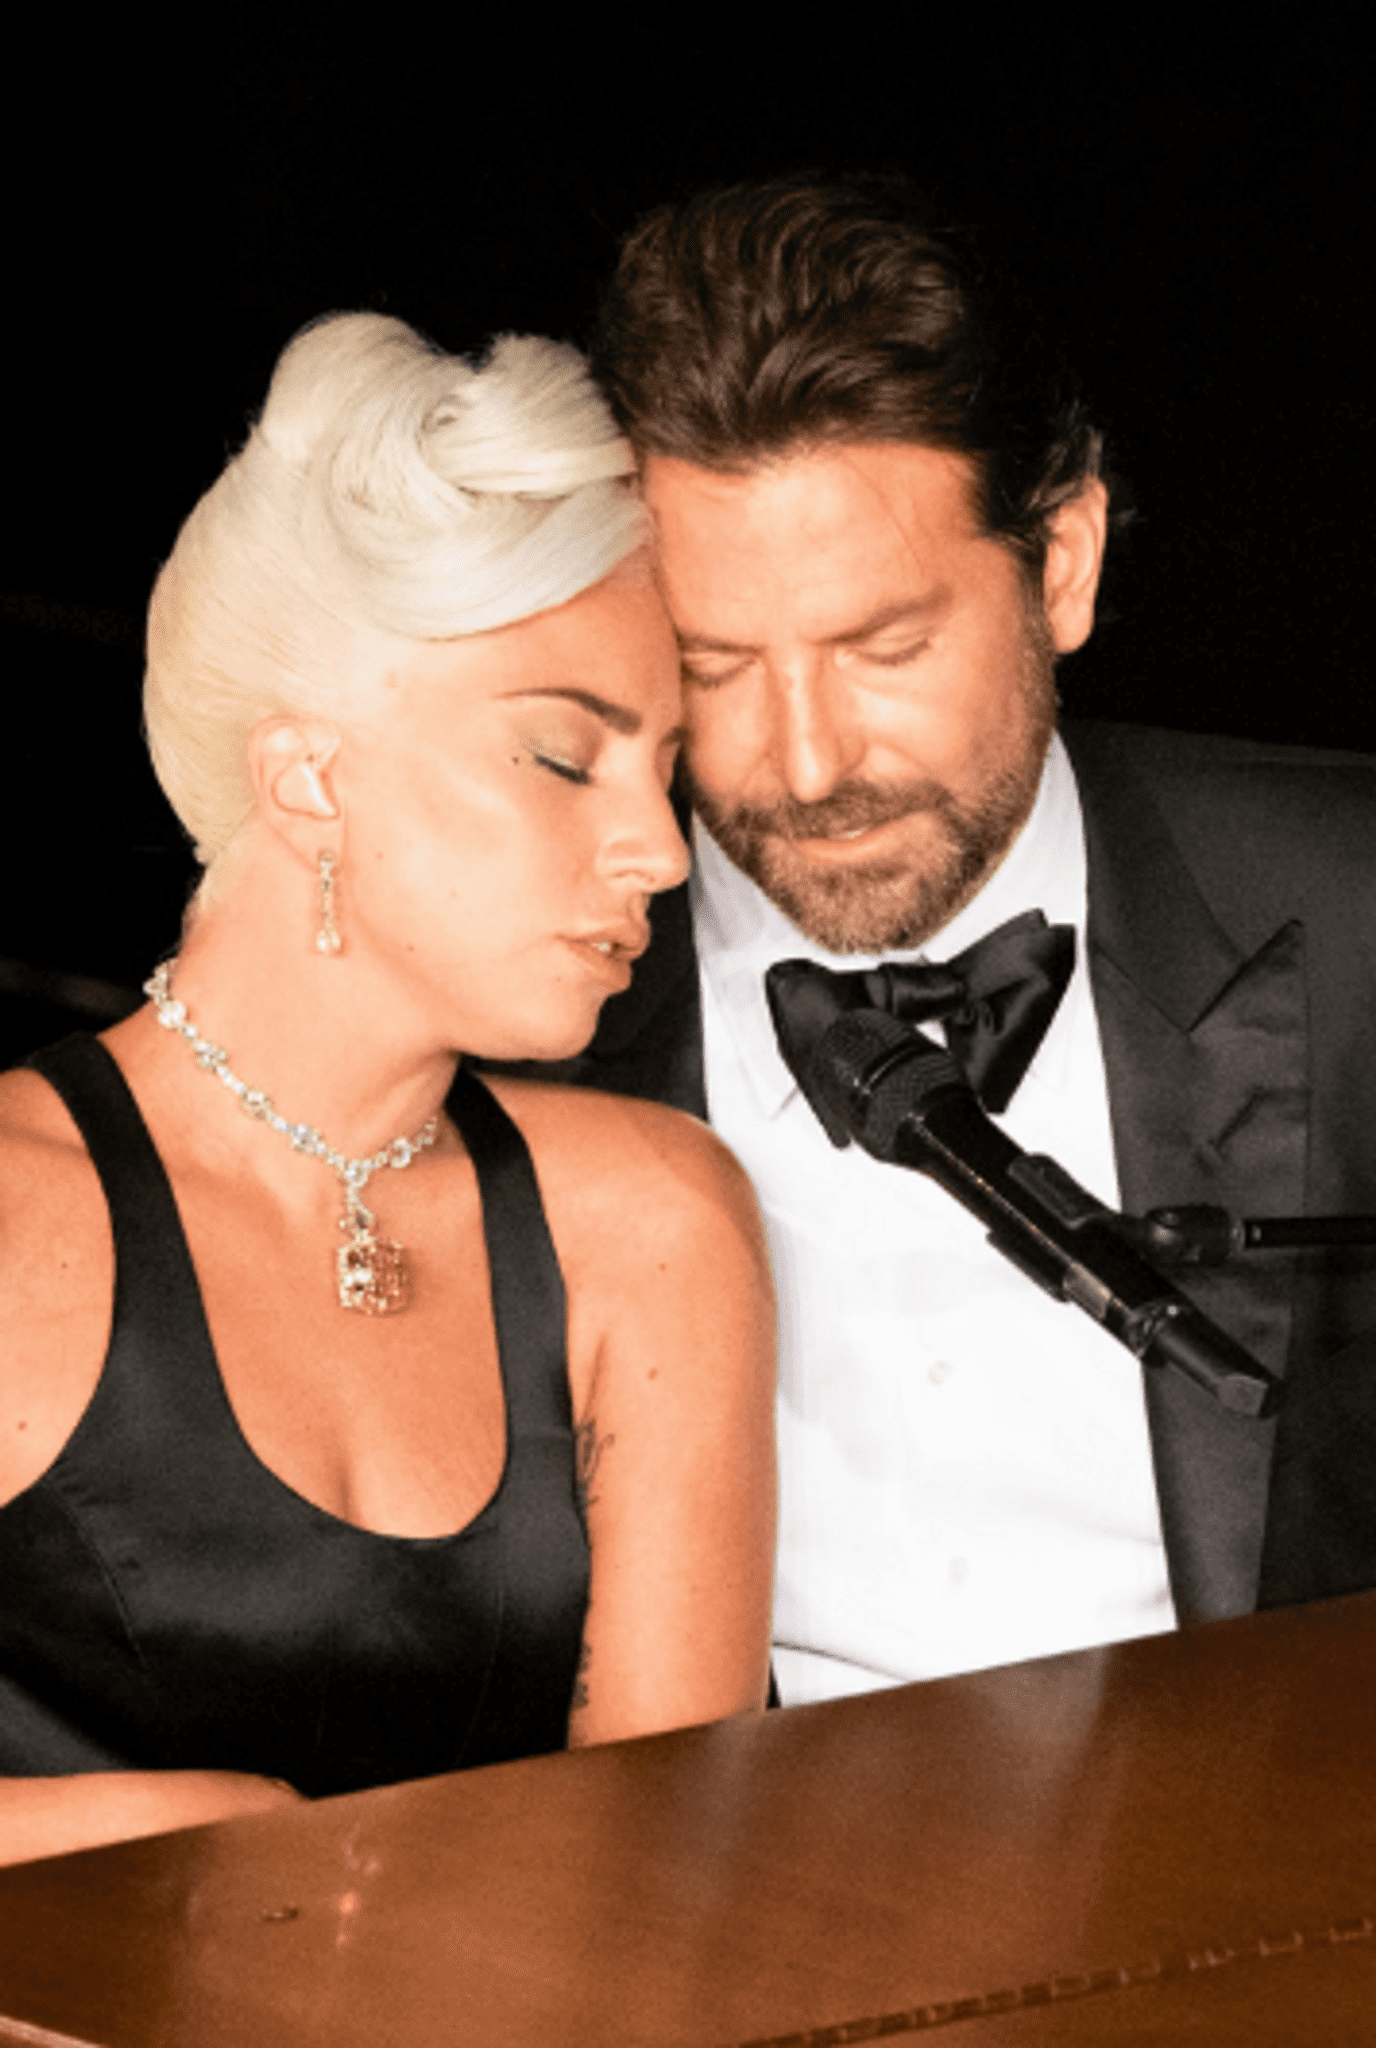 Bradley Cooper finally revealed the truth about his relationship with Lady Gaga